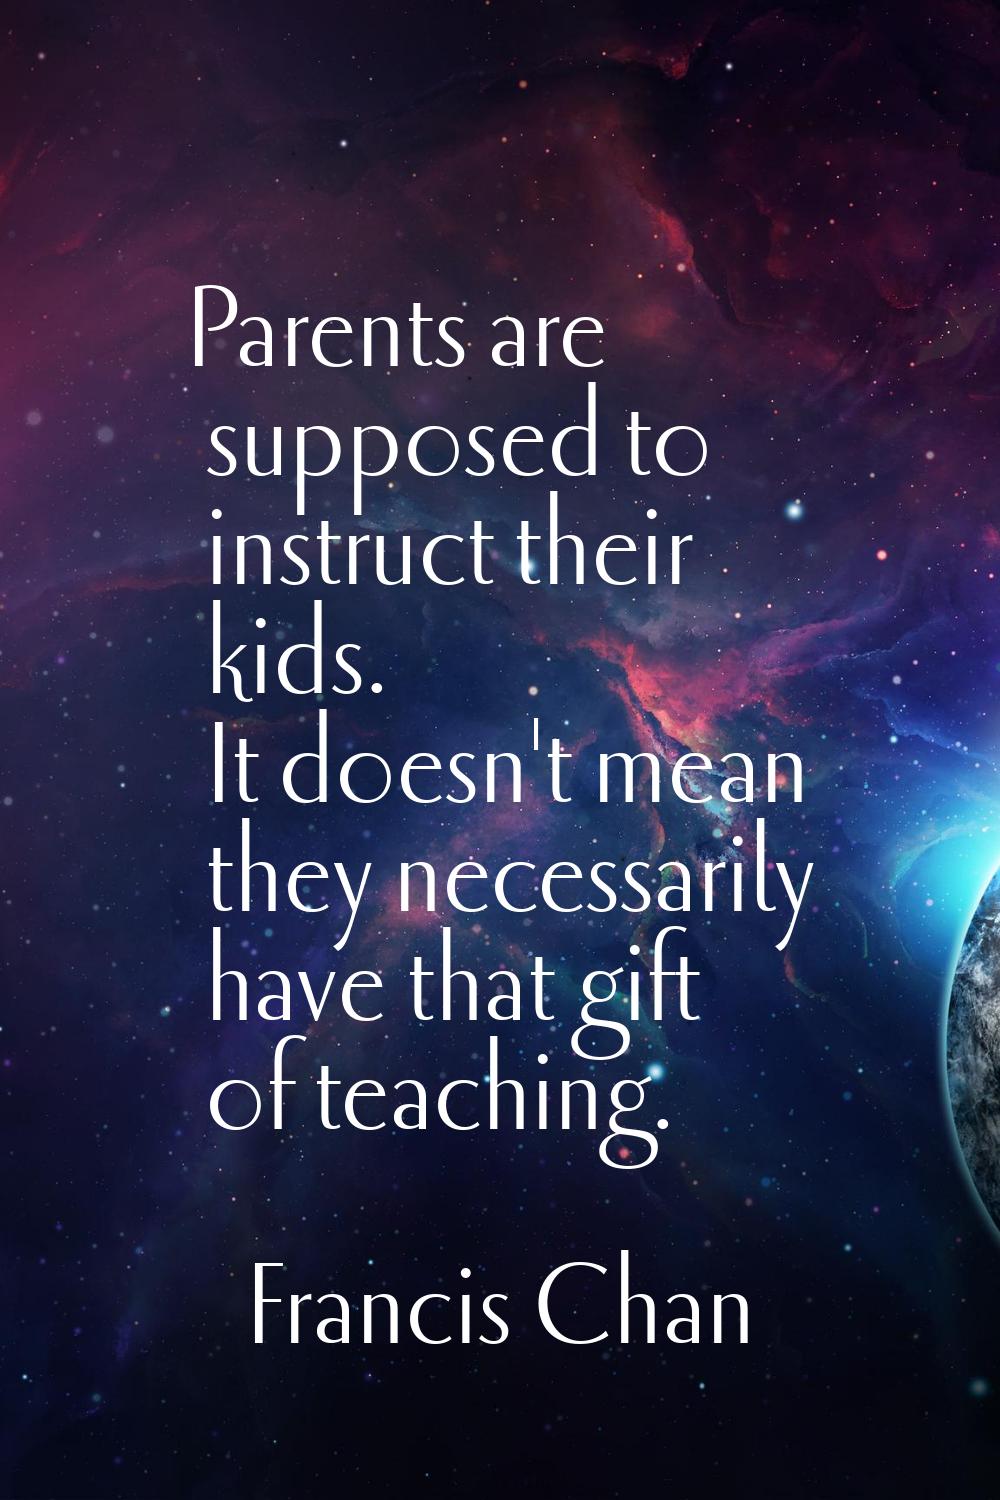 Parents are supposed to instruct their kids. It doesn't mean they necessarily have that gift of tea